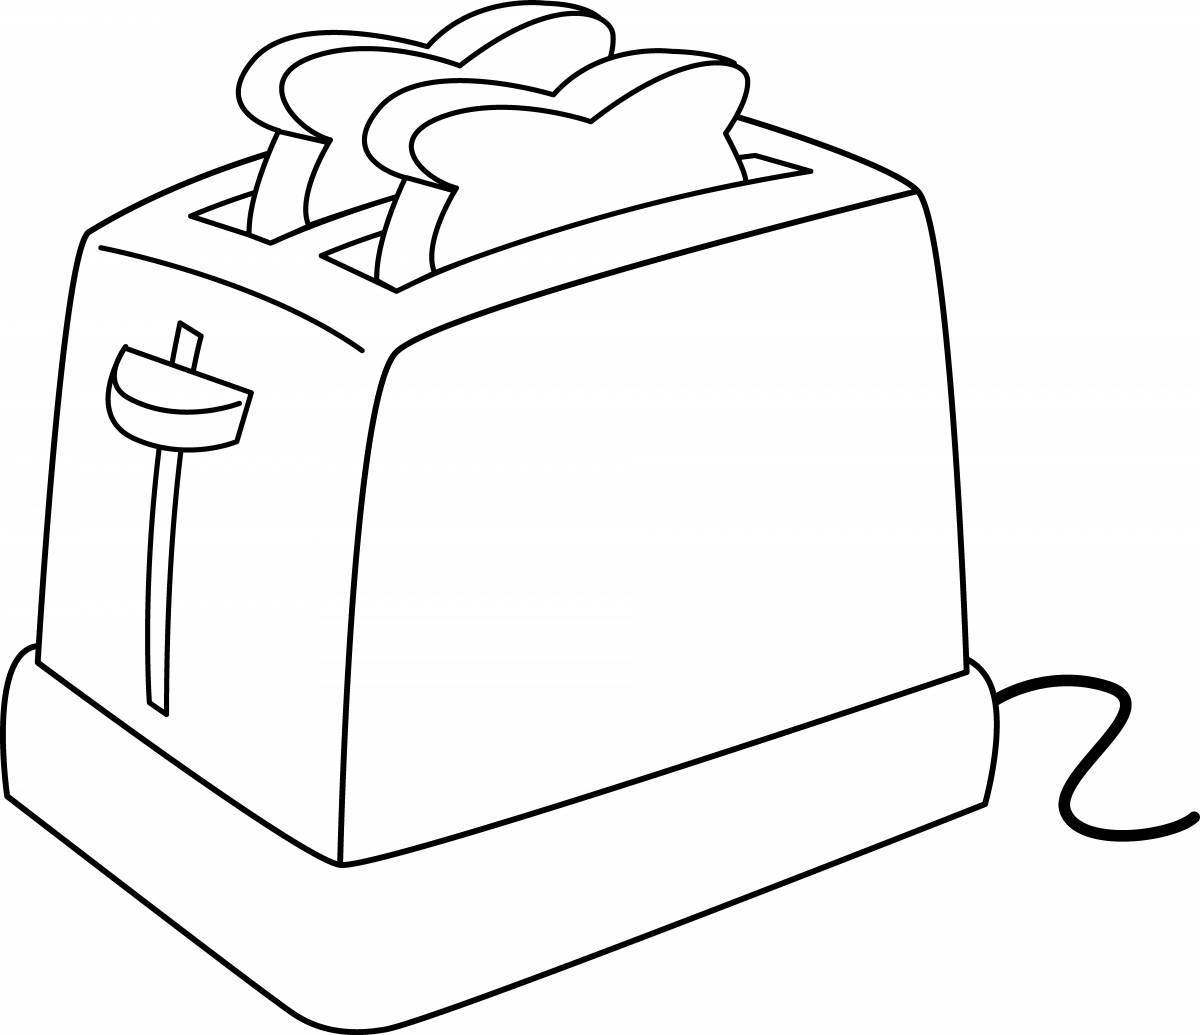 Exciting household appliances coloring page